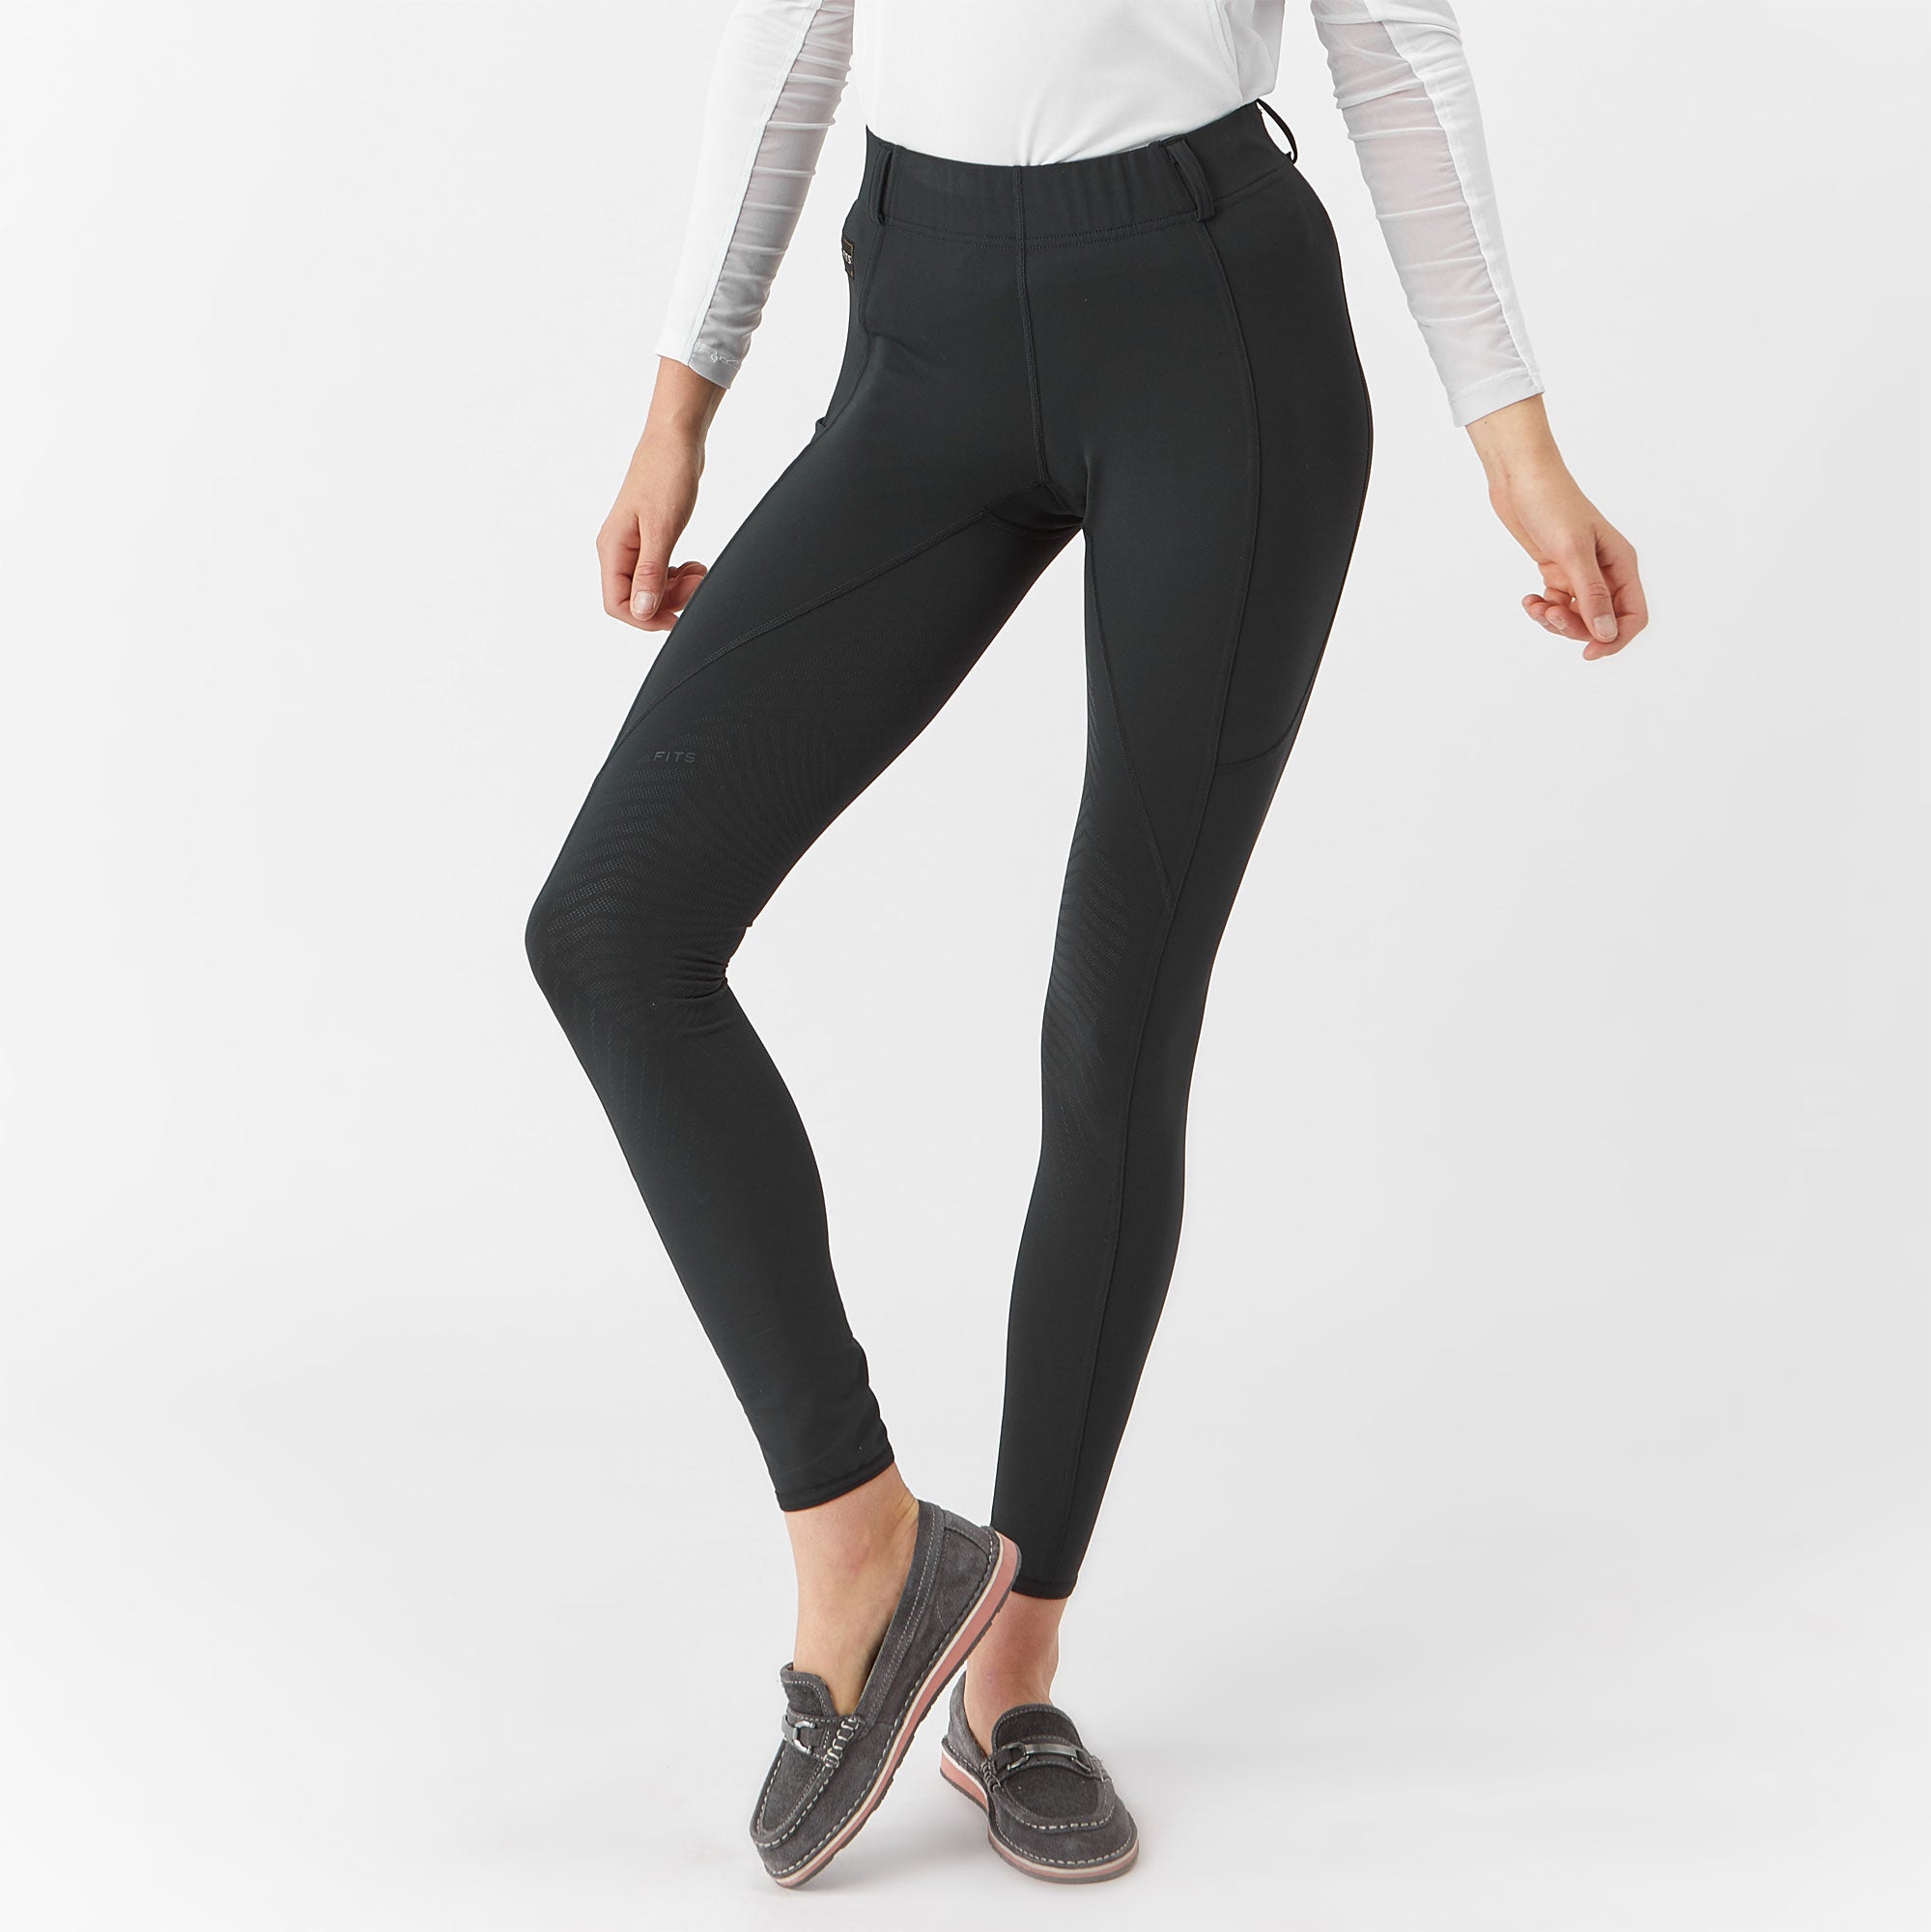 FITS Techtread Full Seat Pull-On Tights Breeches